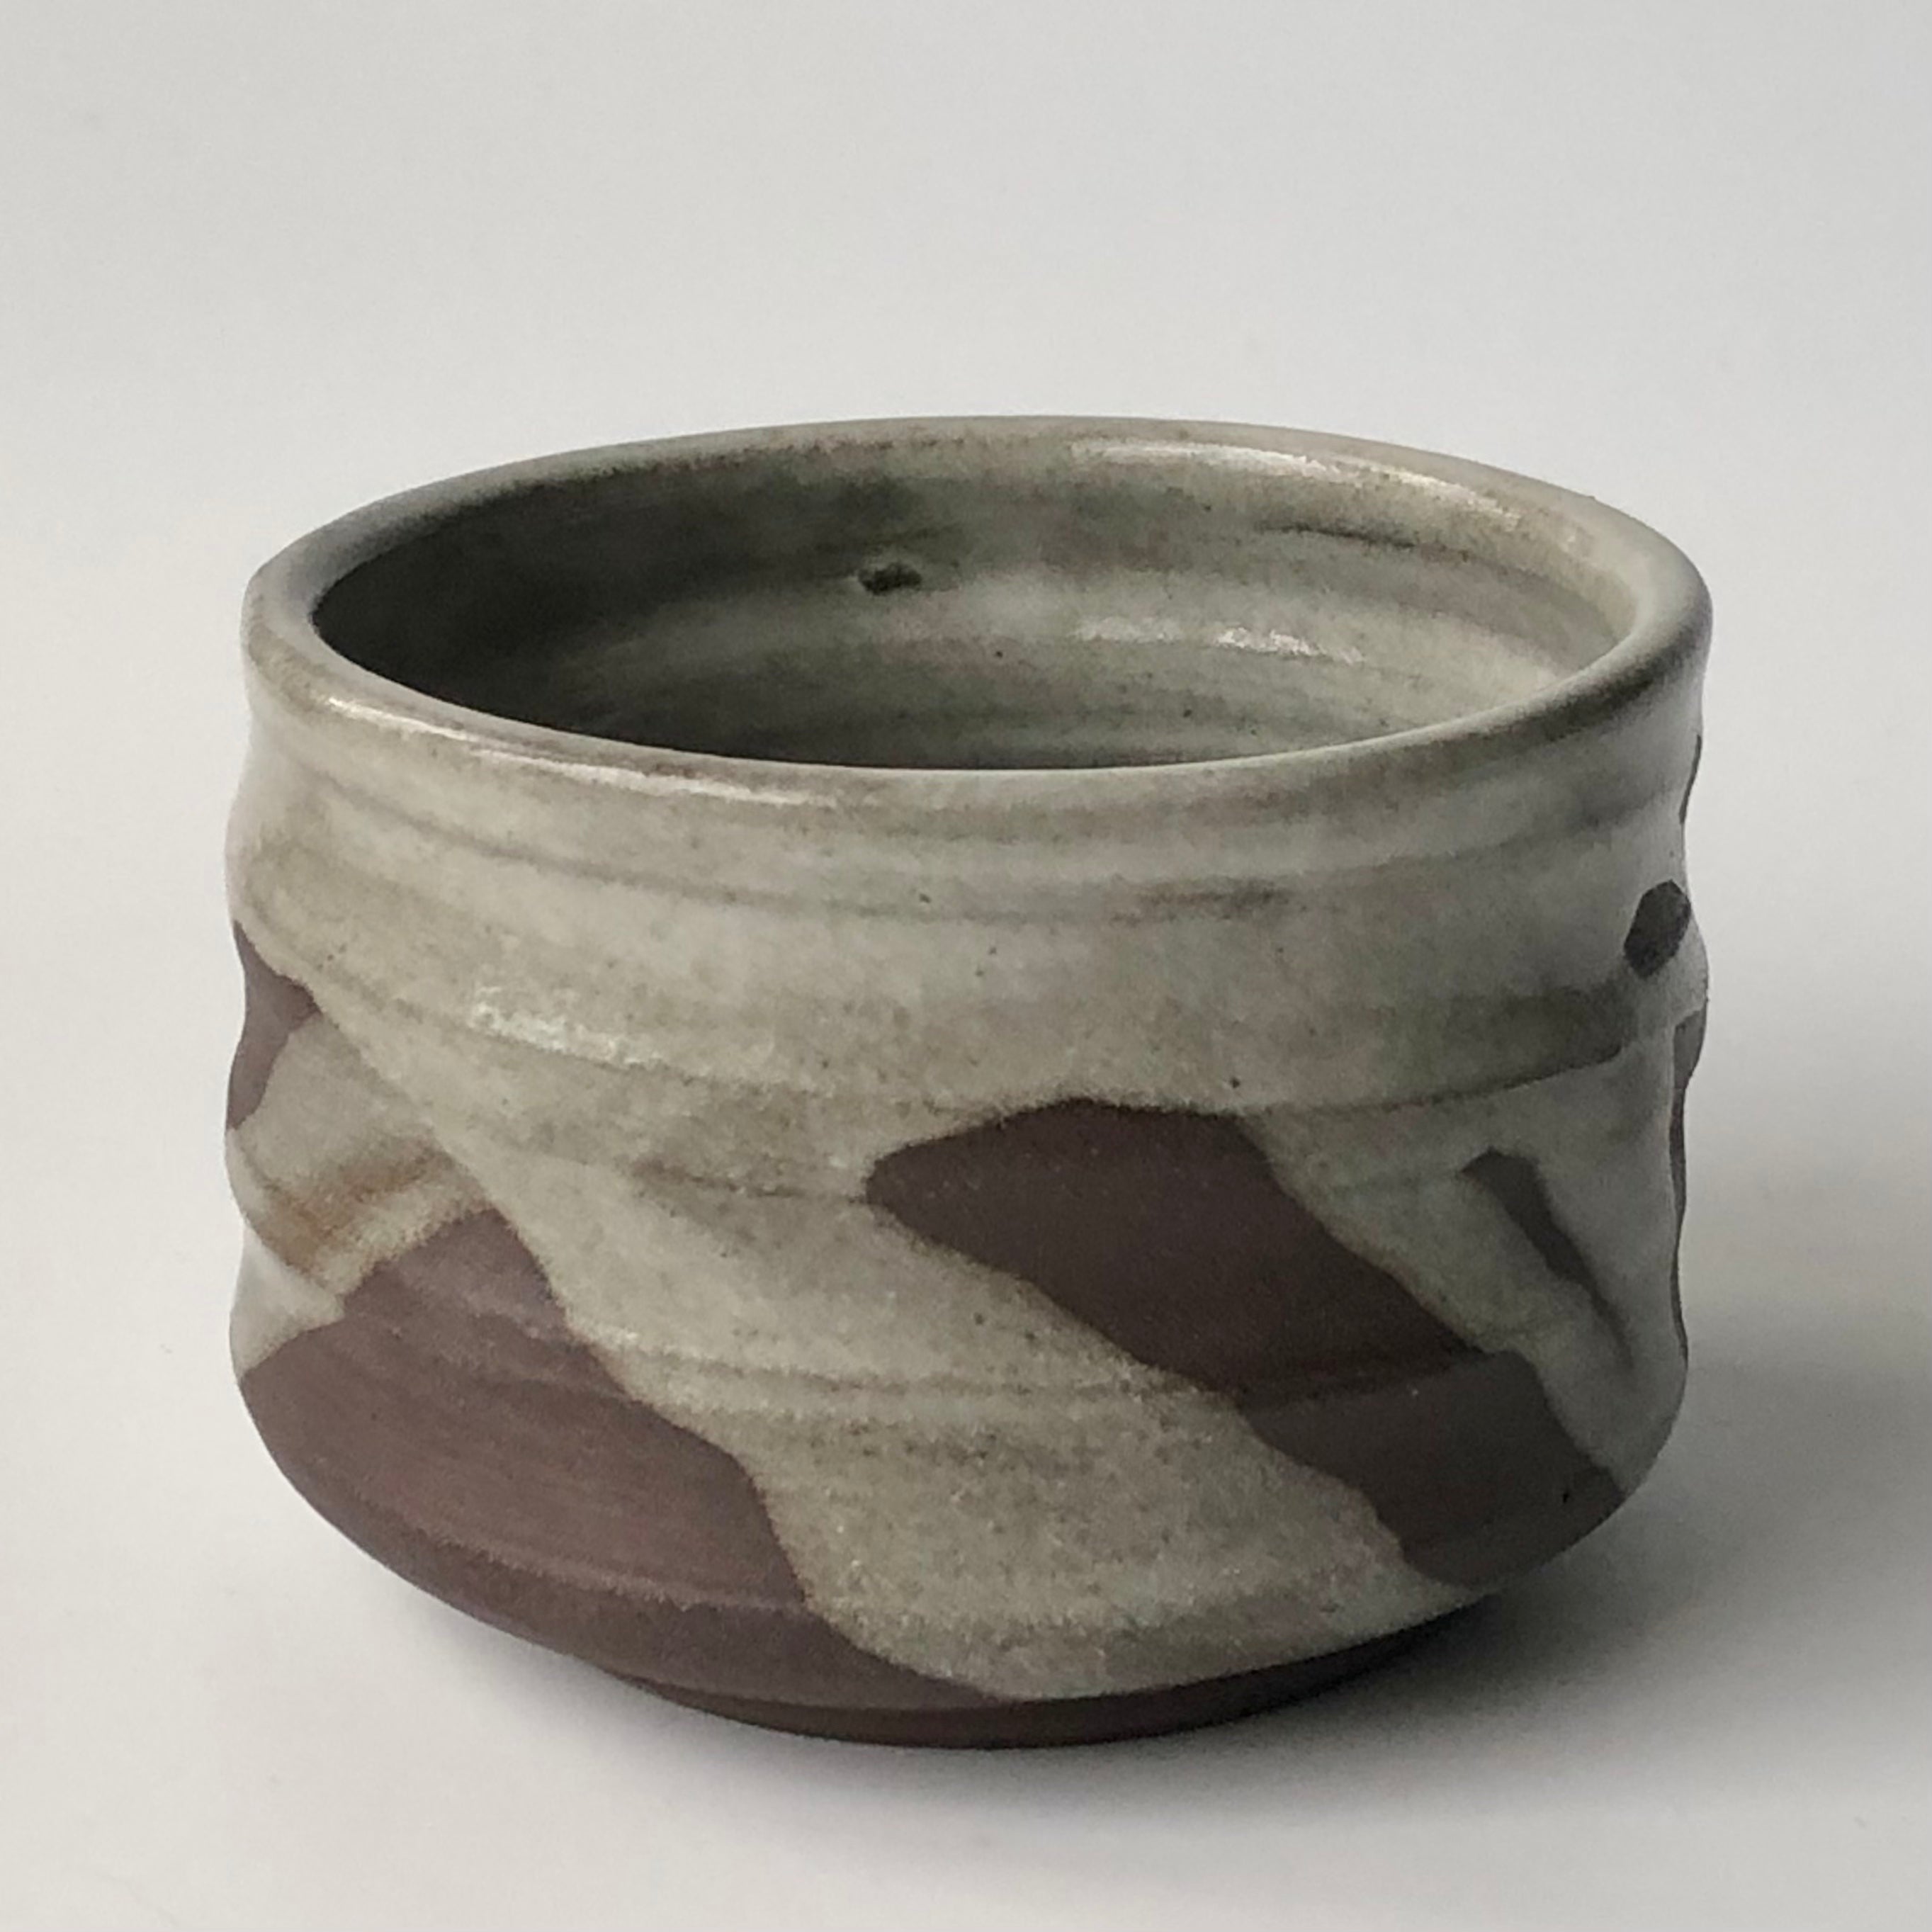 #4 Black Clay Chawan (Teabowl) Splashed with Apple Orchard Ash Glaze